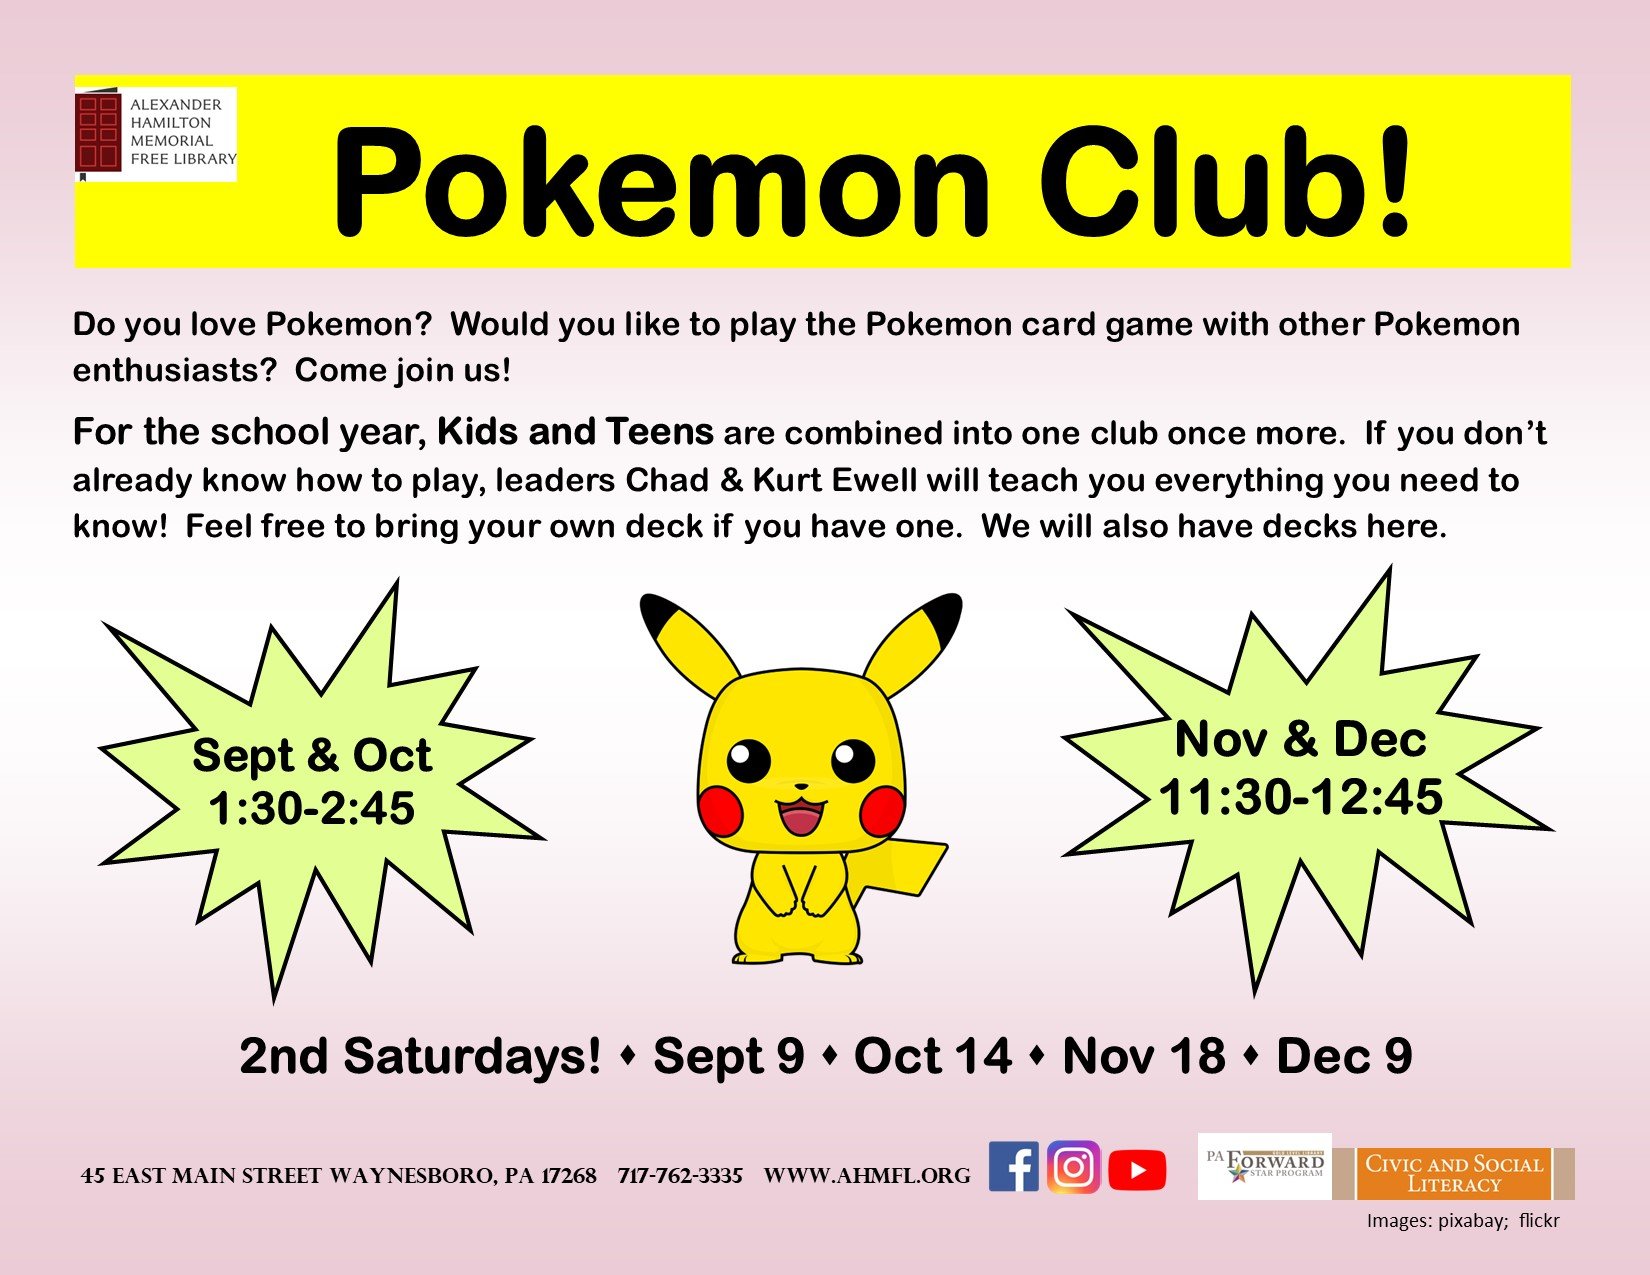 Morristown-Hamblen Library - The next Pokemon Club is on October 11 from  4-5pm! Don't forget to sign up if you haven't already! You can call  423-586-6410 or text 423-301-6882 to sign up